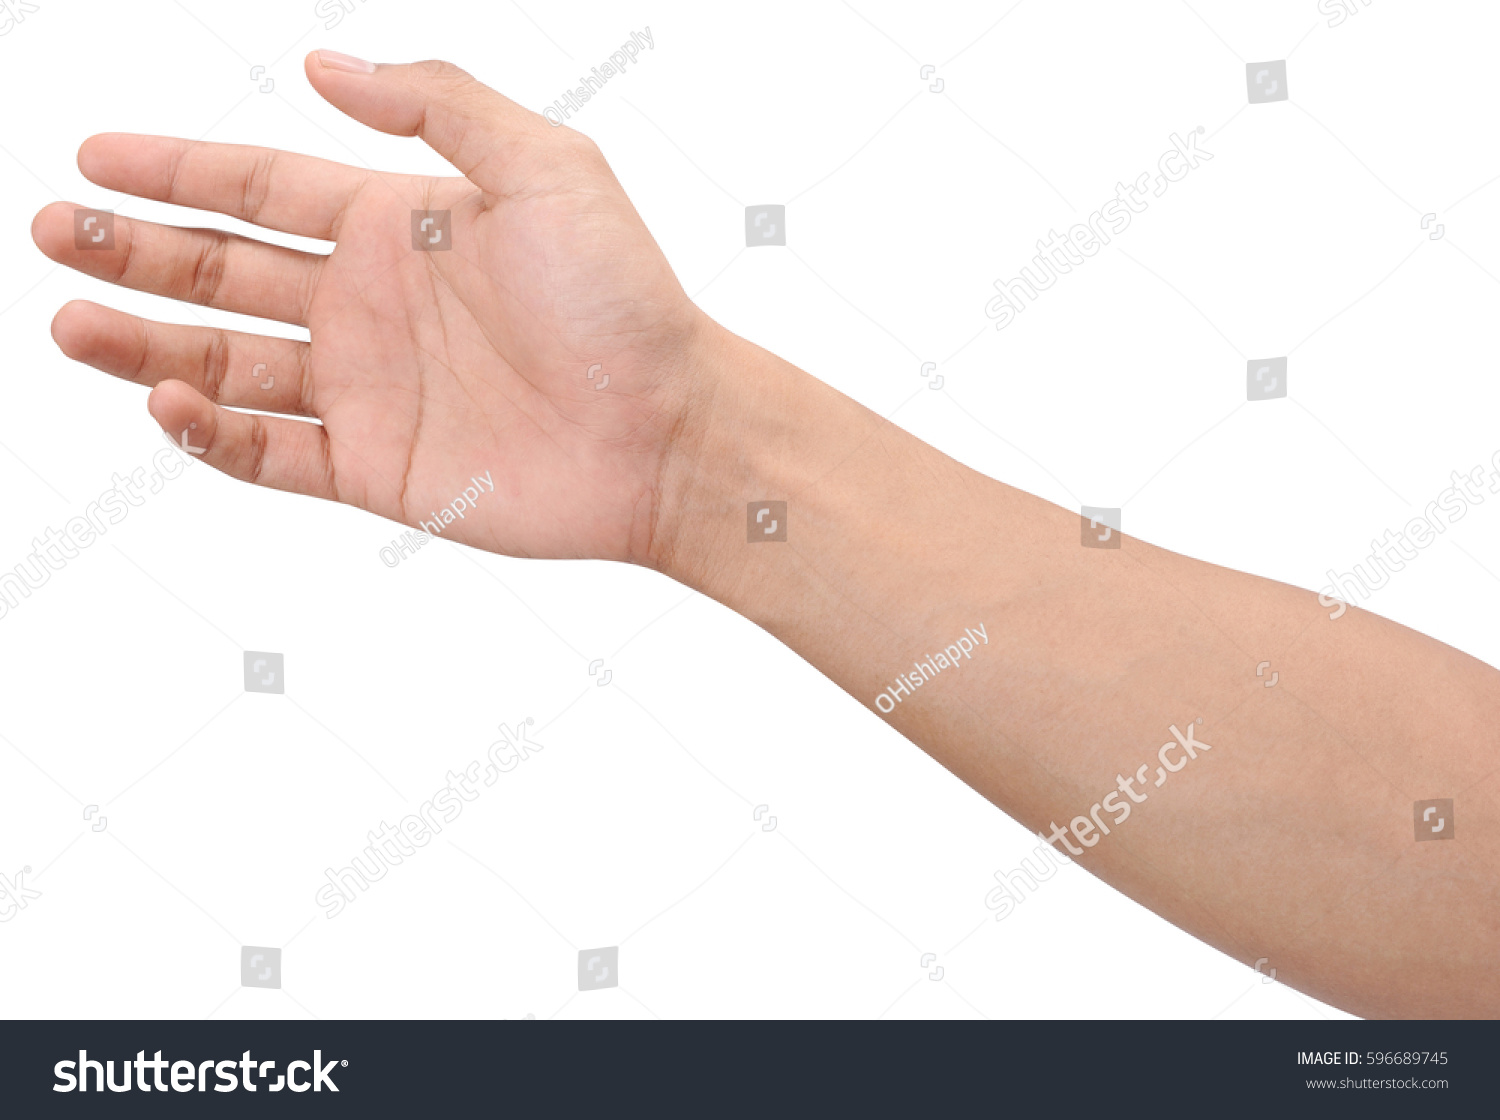 Men hands sign isolated is on white background with clipping path #596689745